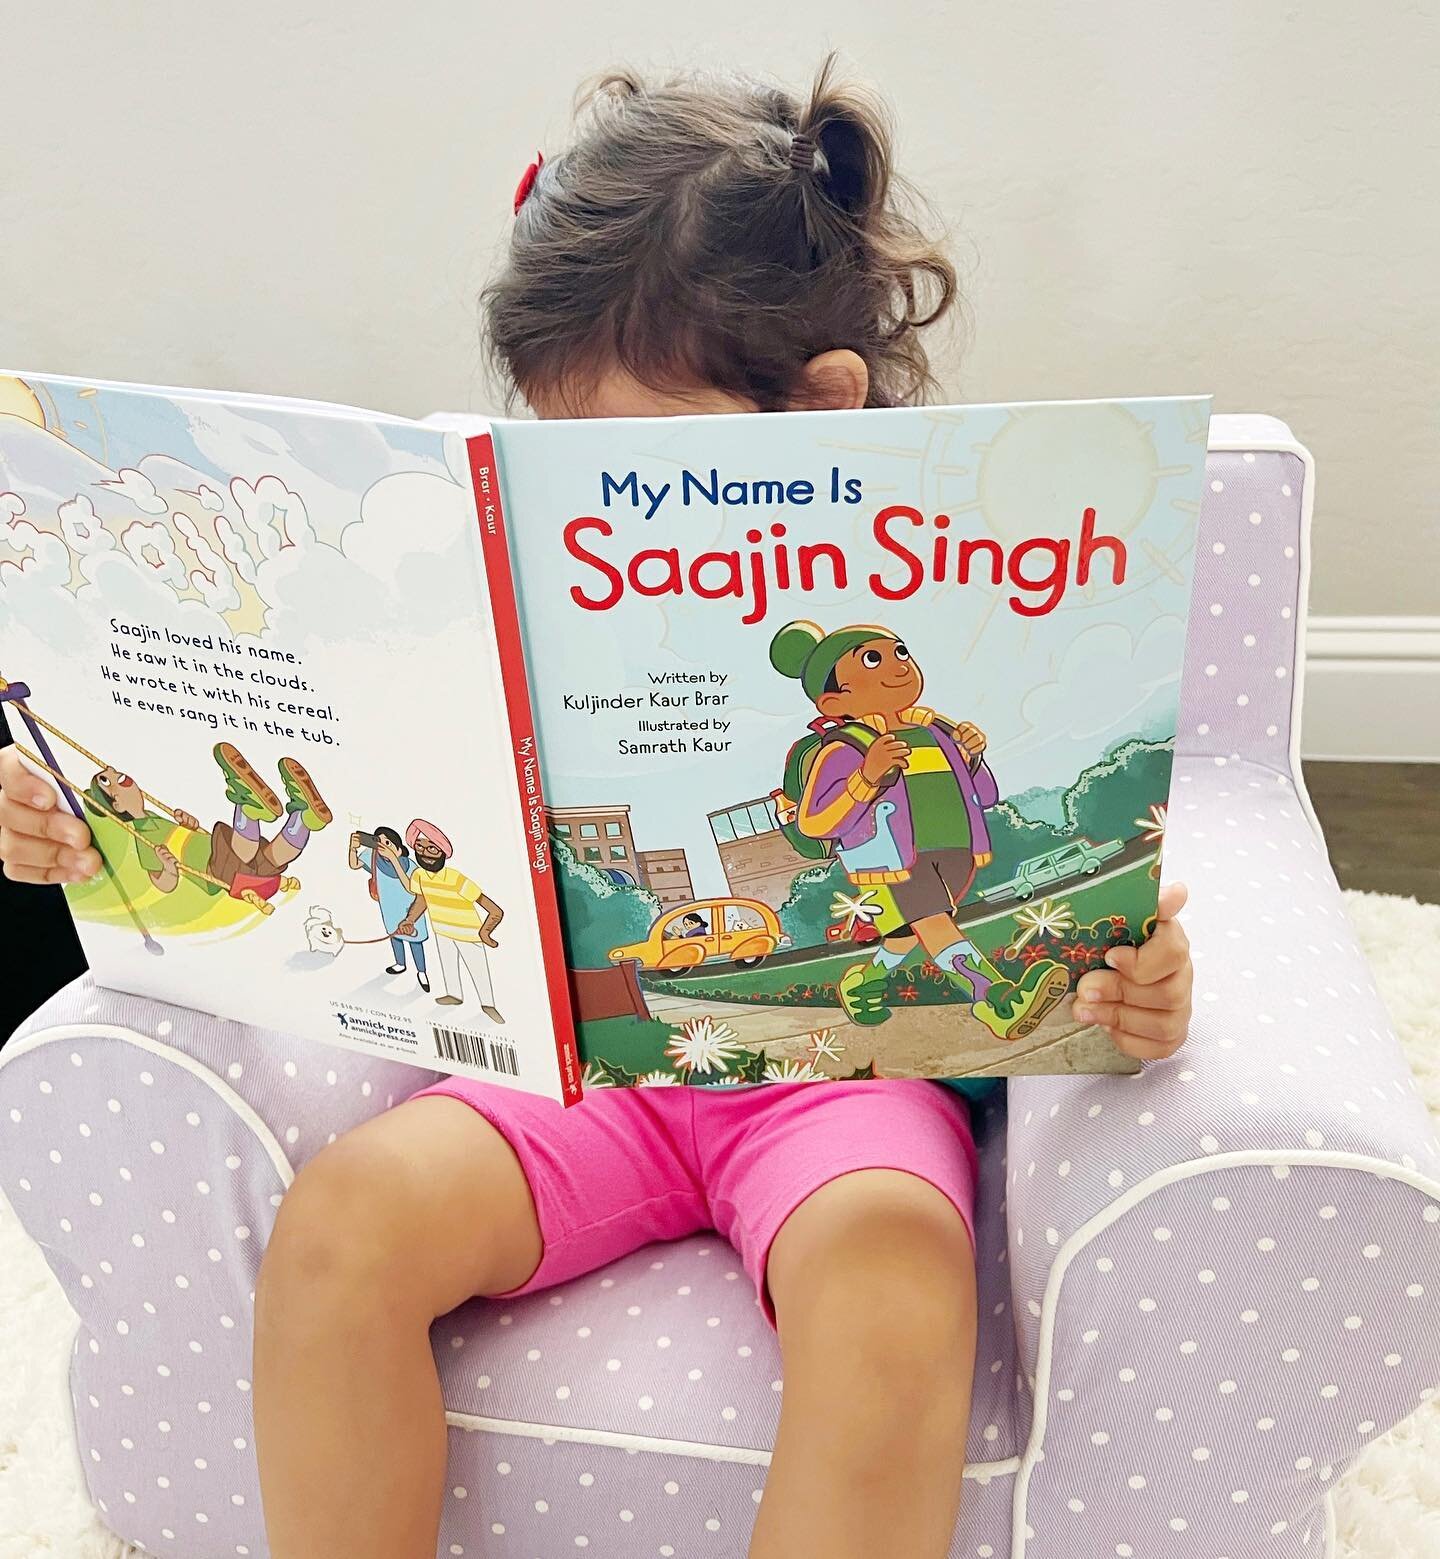 Reading Corner | My Name is Saajin Singh

We're continuing with our back to school theme and today's book is, &quot;My Name is Saajin Singh,&quot; written by Kuljinder Brar, illustrated by Samrath Kaur, and published by Annick Press.&nbsp;

How many 